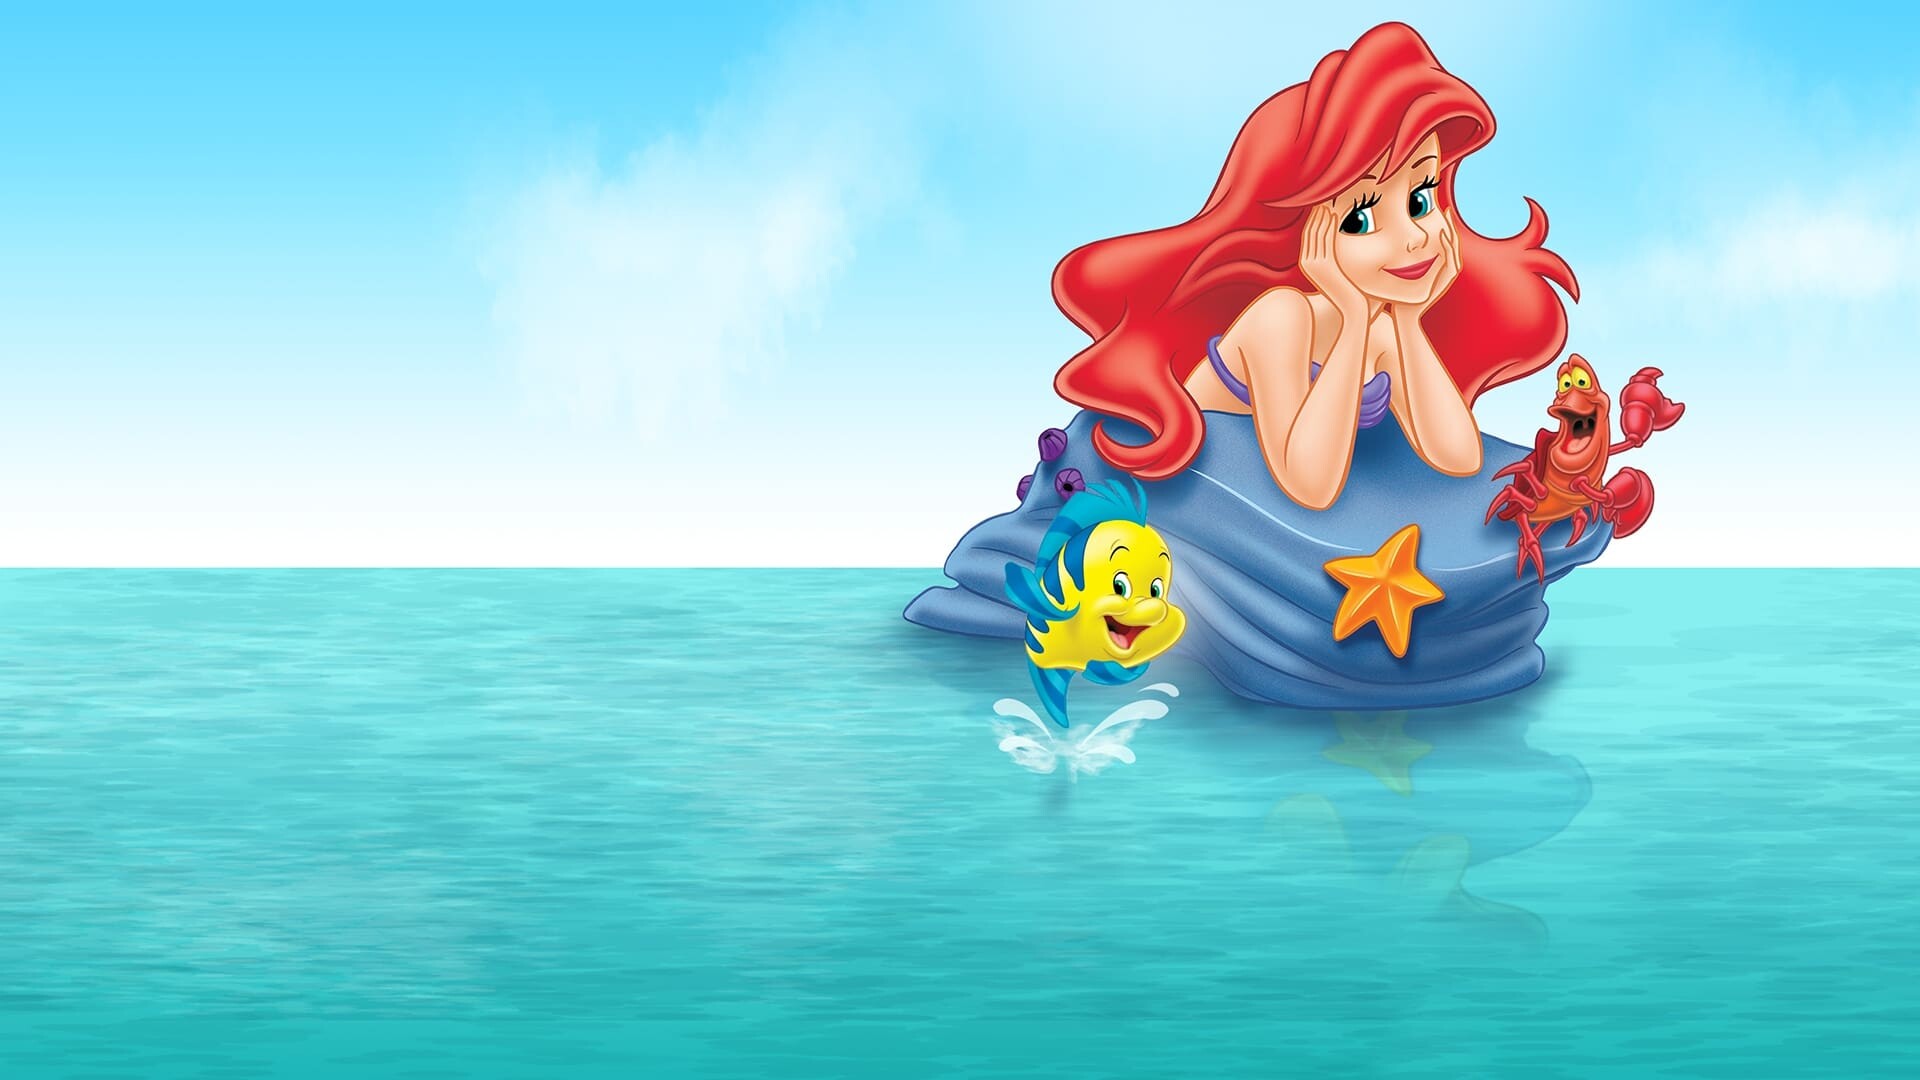 The Little Mermaid: The youngest daughter of King Triton and the princess of the underwater kingdom of Atlantica. 1920x1080 Full HD Background.